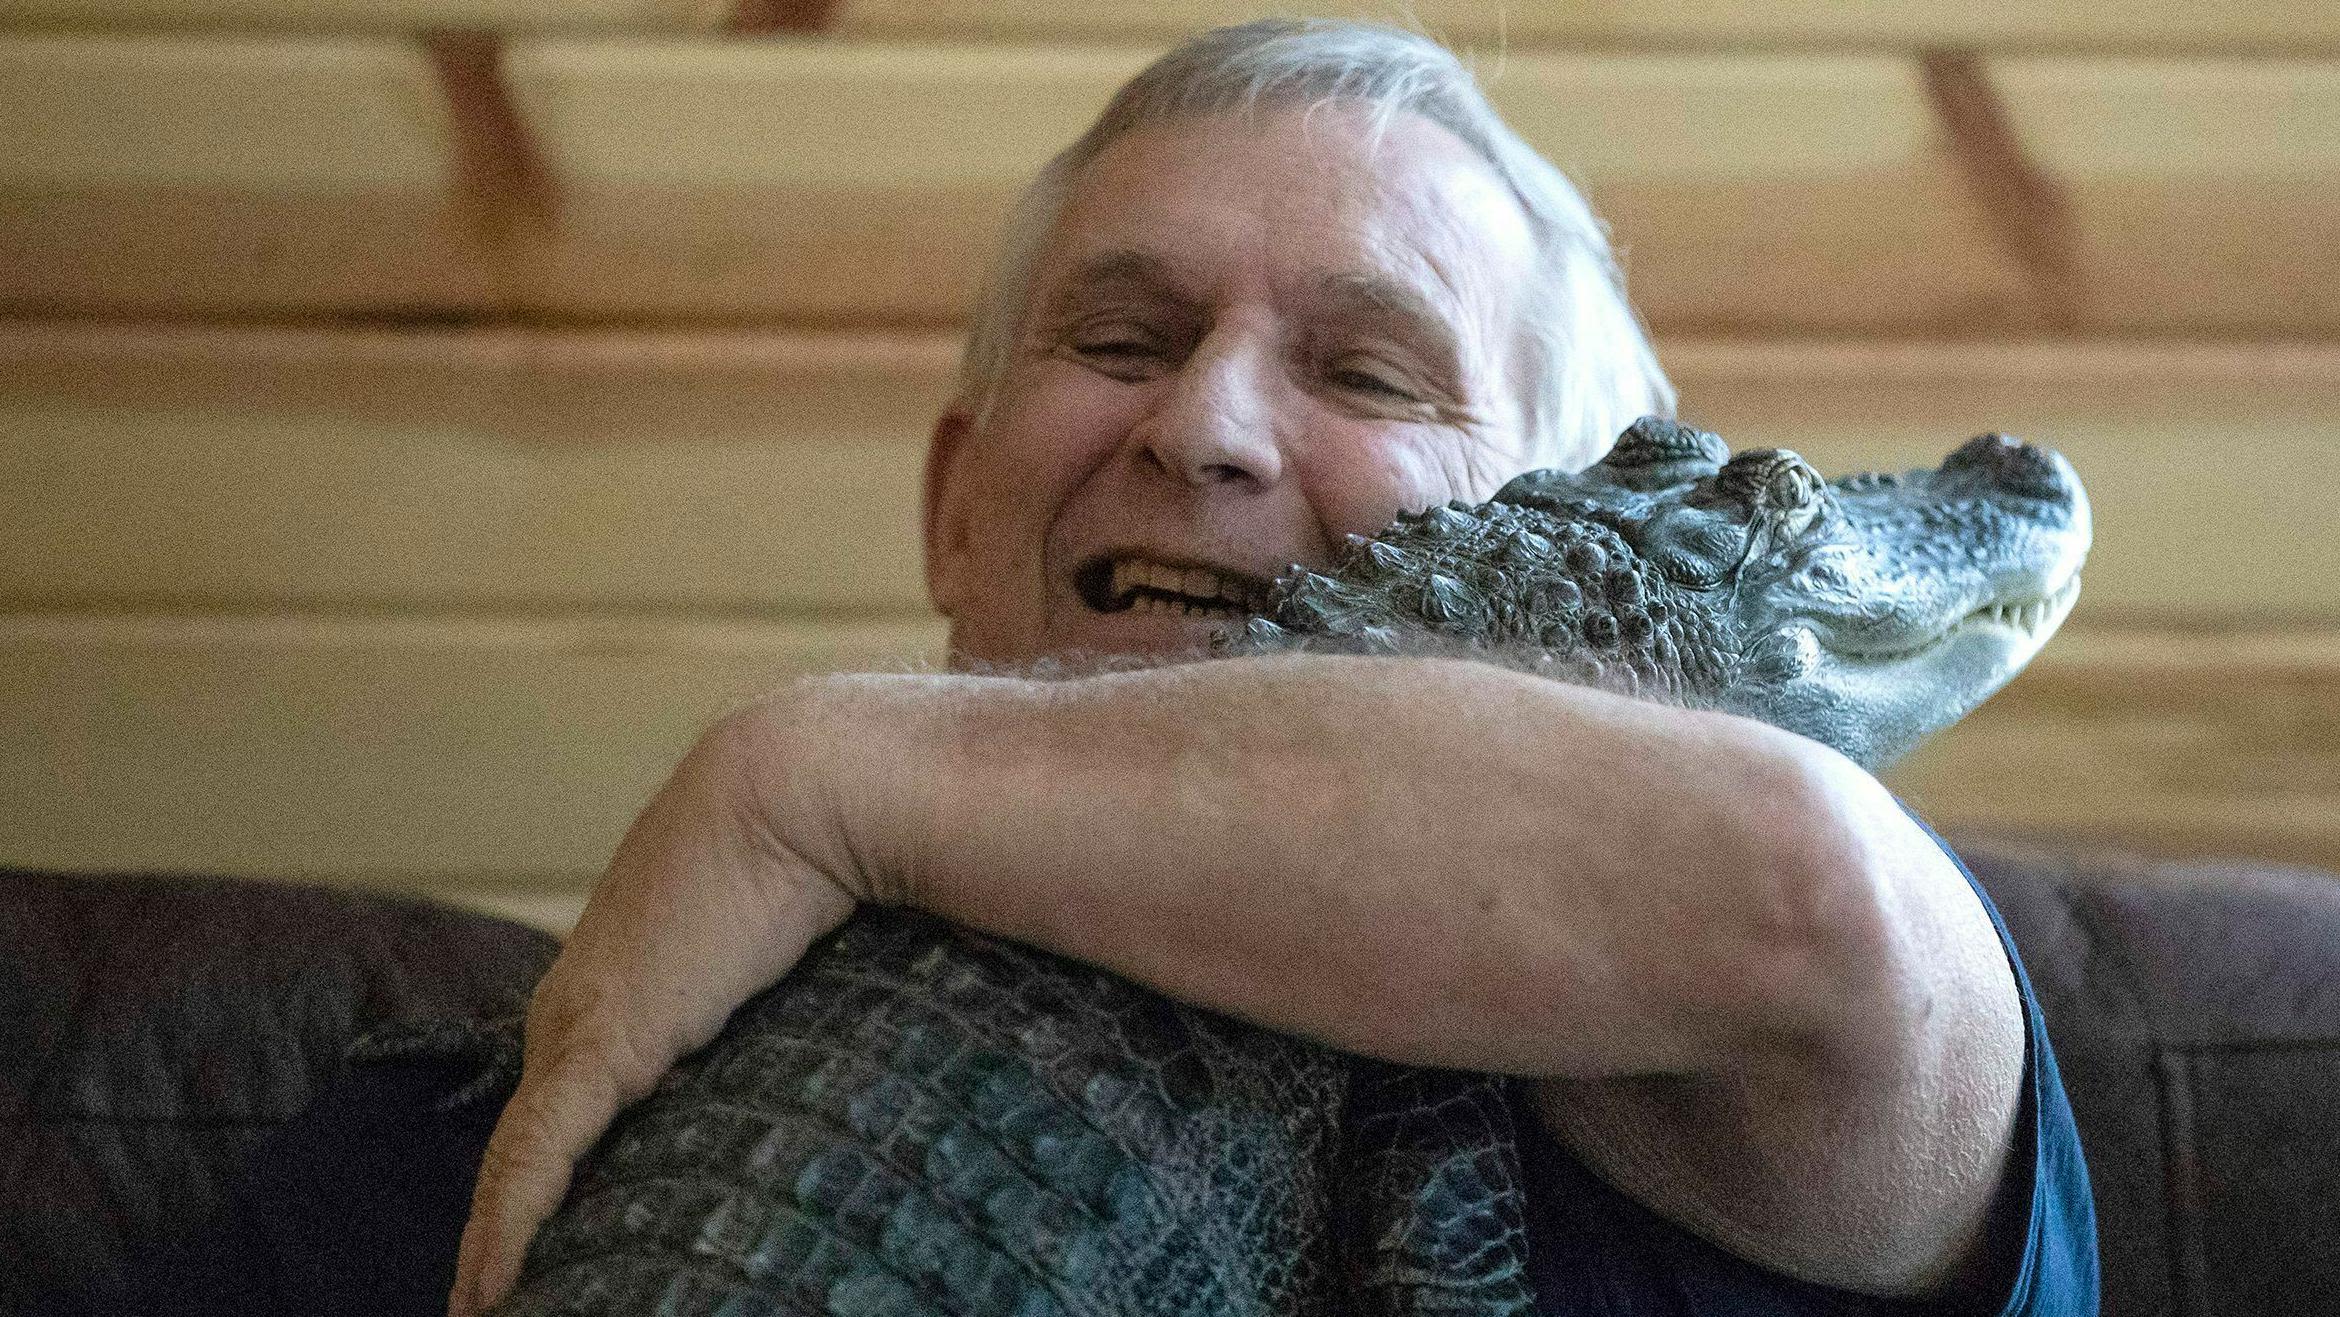 Emotional support alligator taken and released in swamp